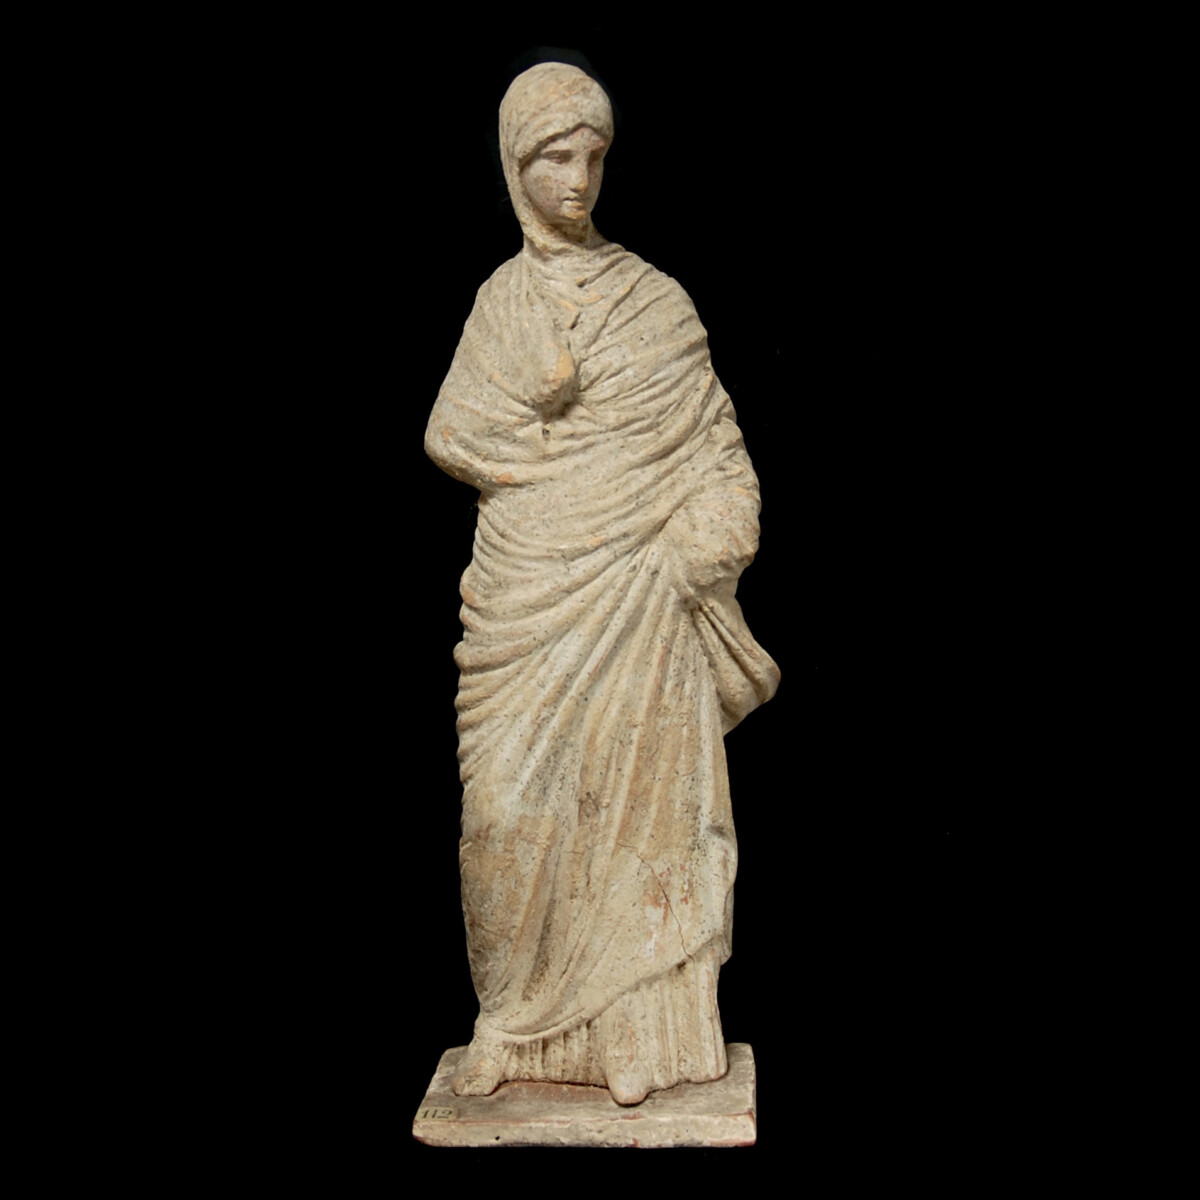 8 Tanagra statuette of a veiled woman